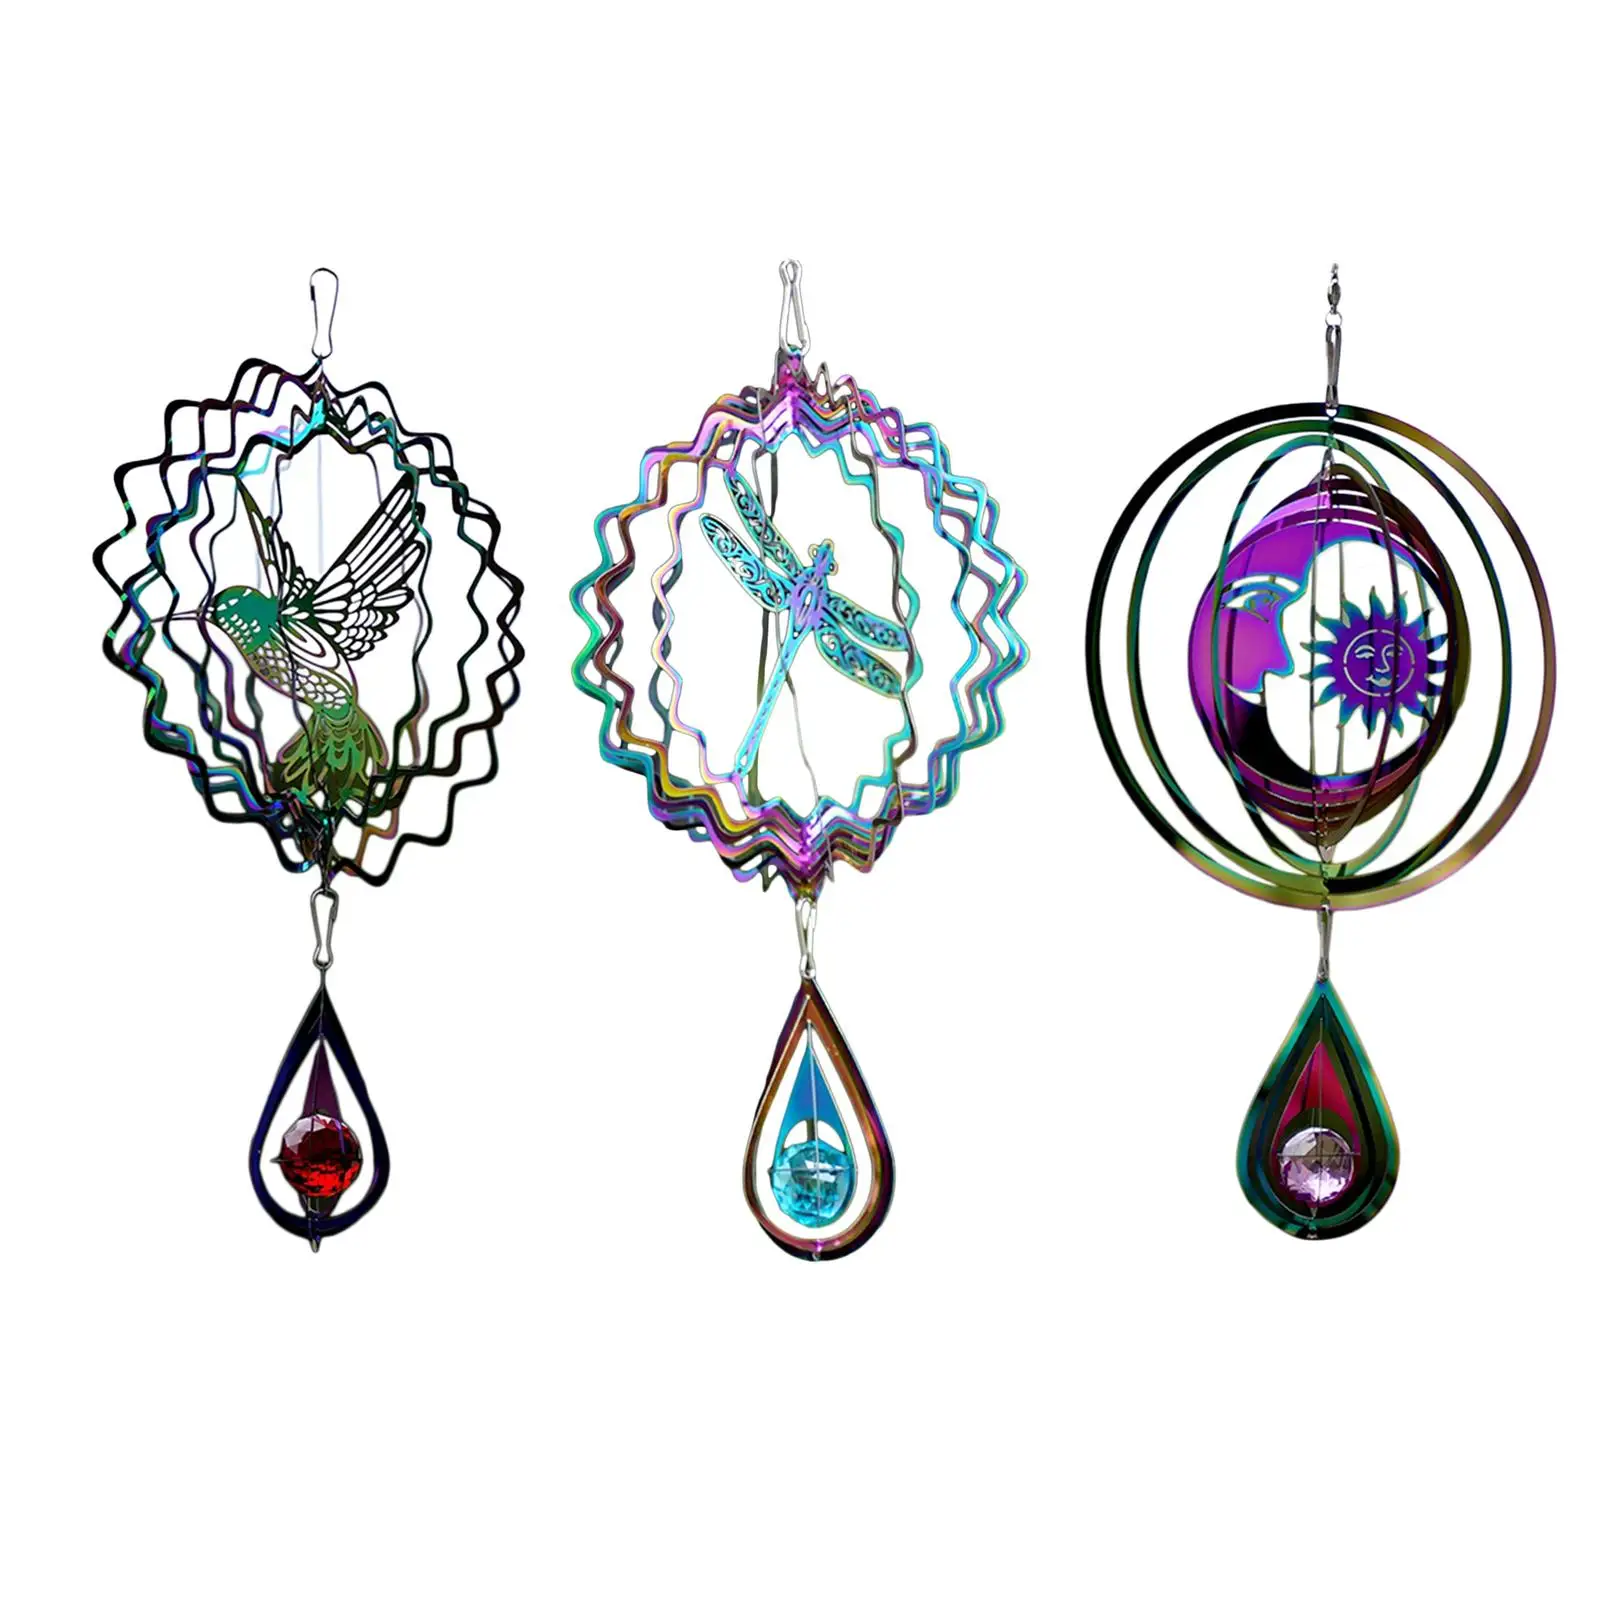 Wind Spinner Garden Decorative Windchime Weatherproof Wind Chime Wind Sculpture Hanging for Farm Yard Porch Living Room Outside